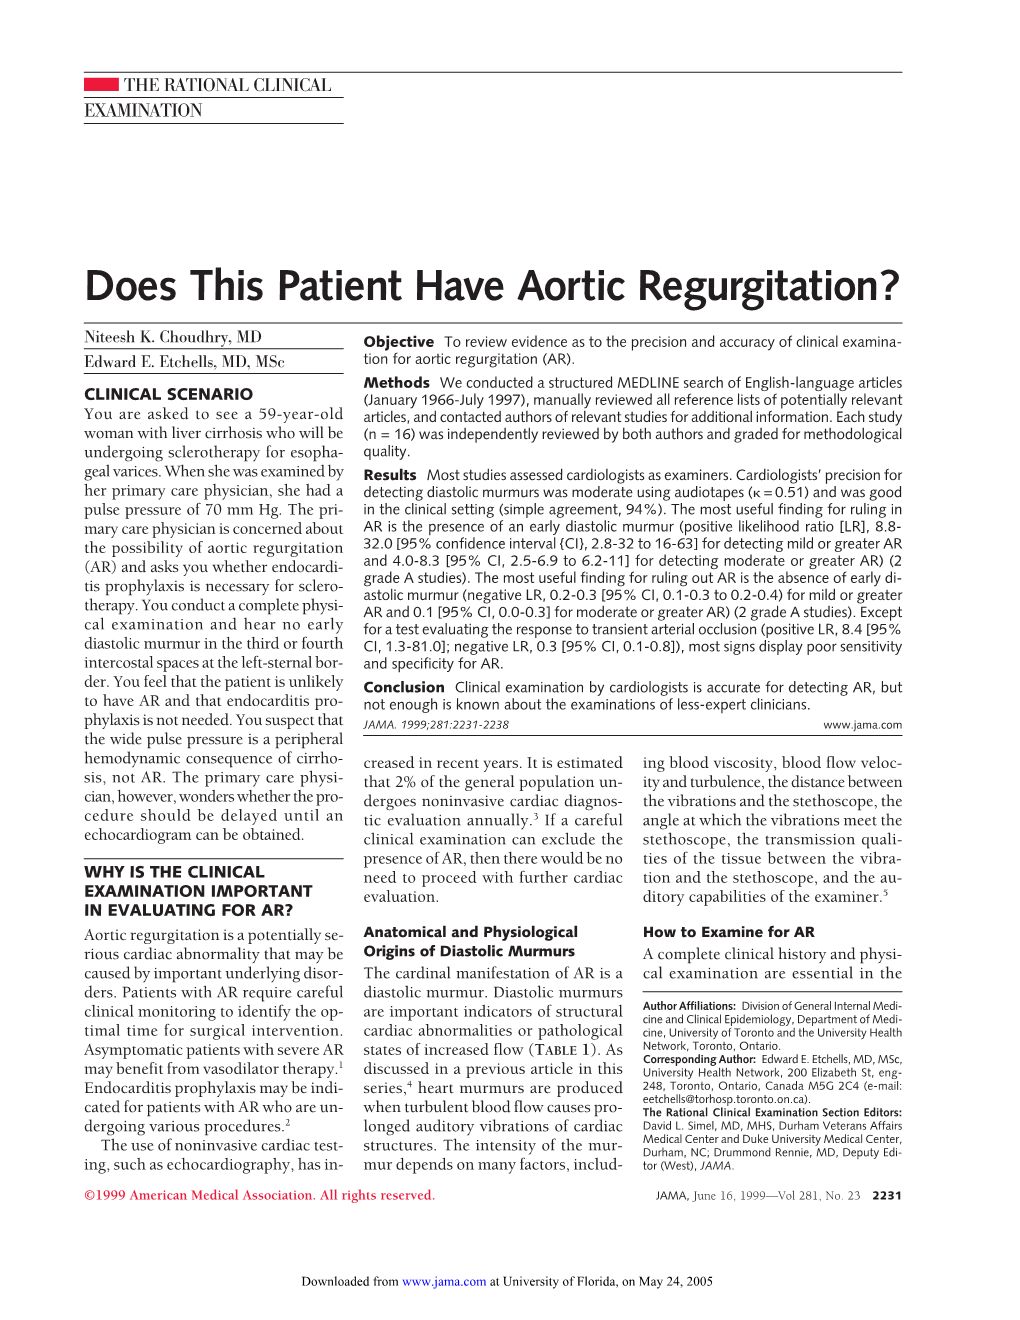 Does This Patient Have Aortic Regurgitation?